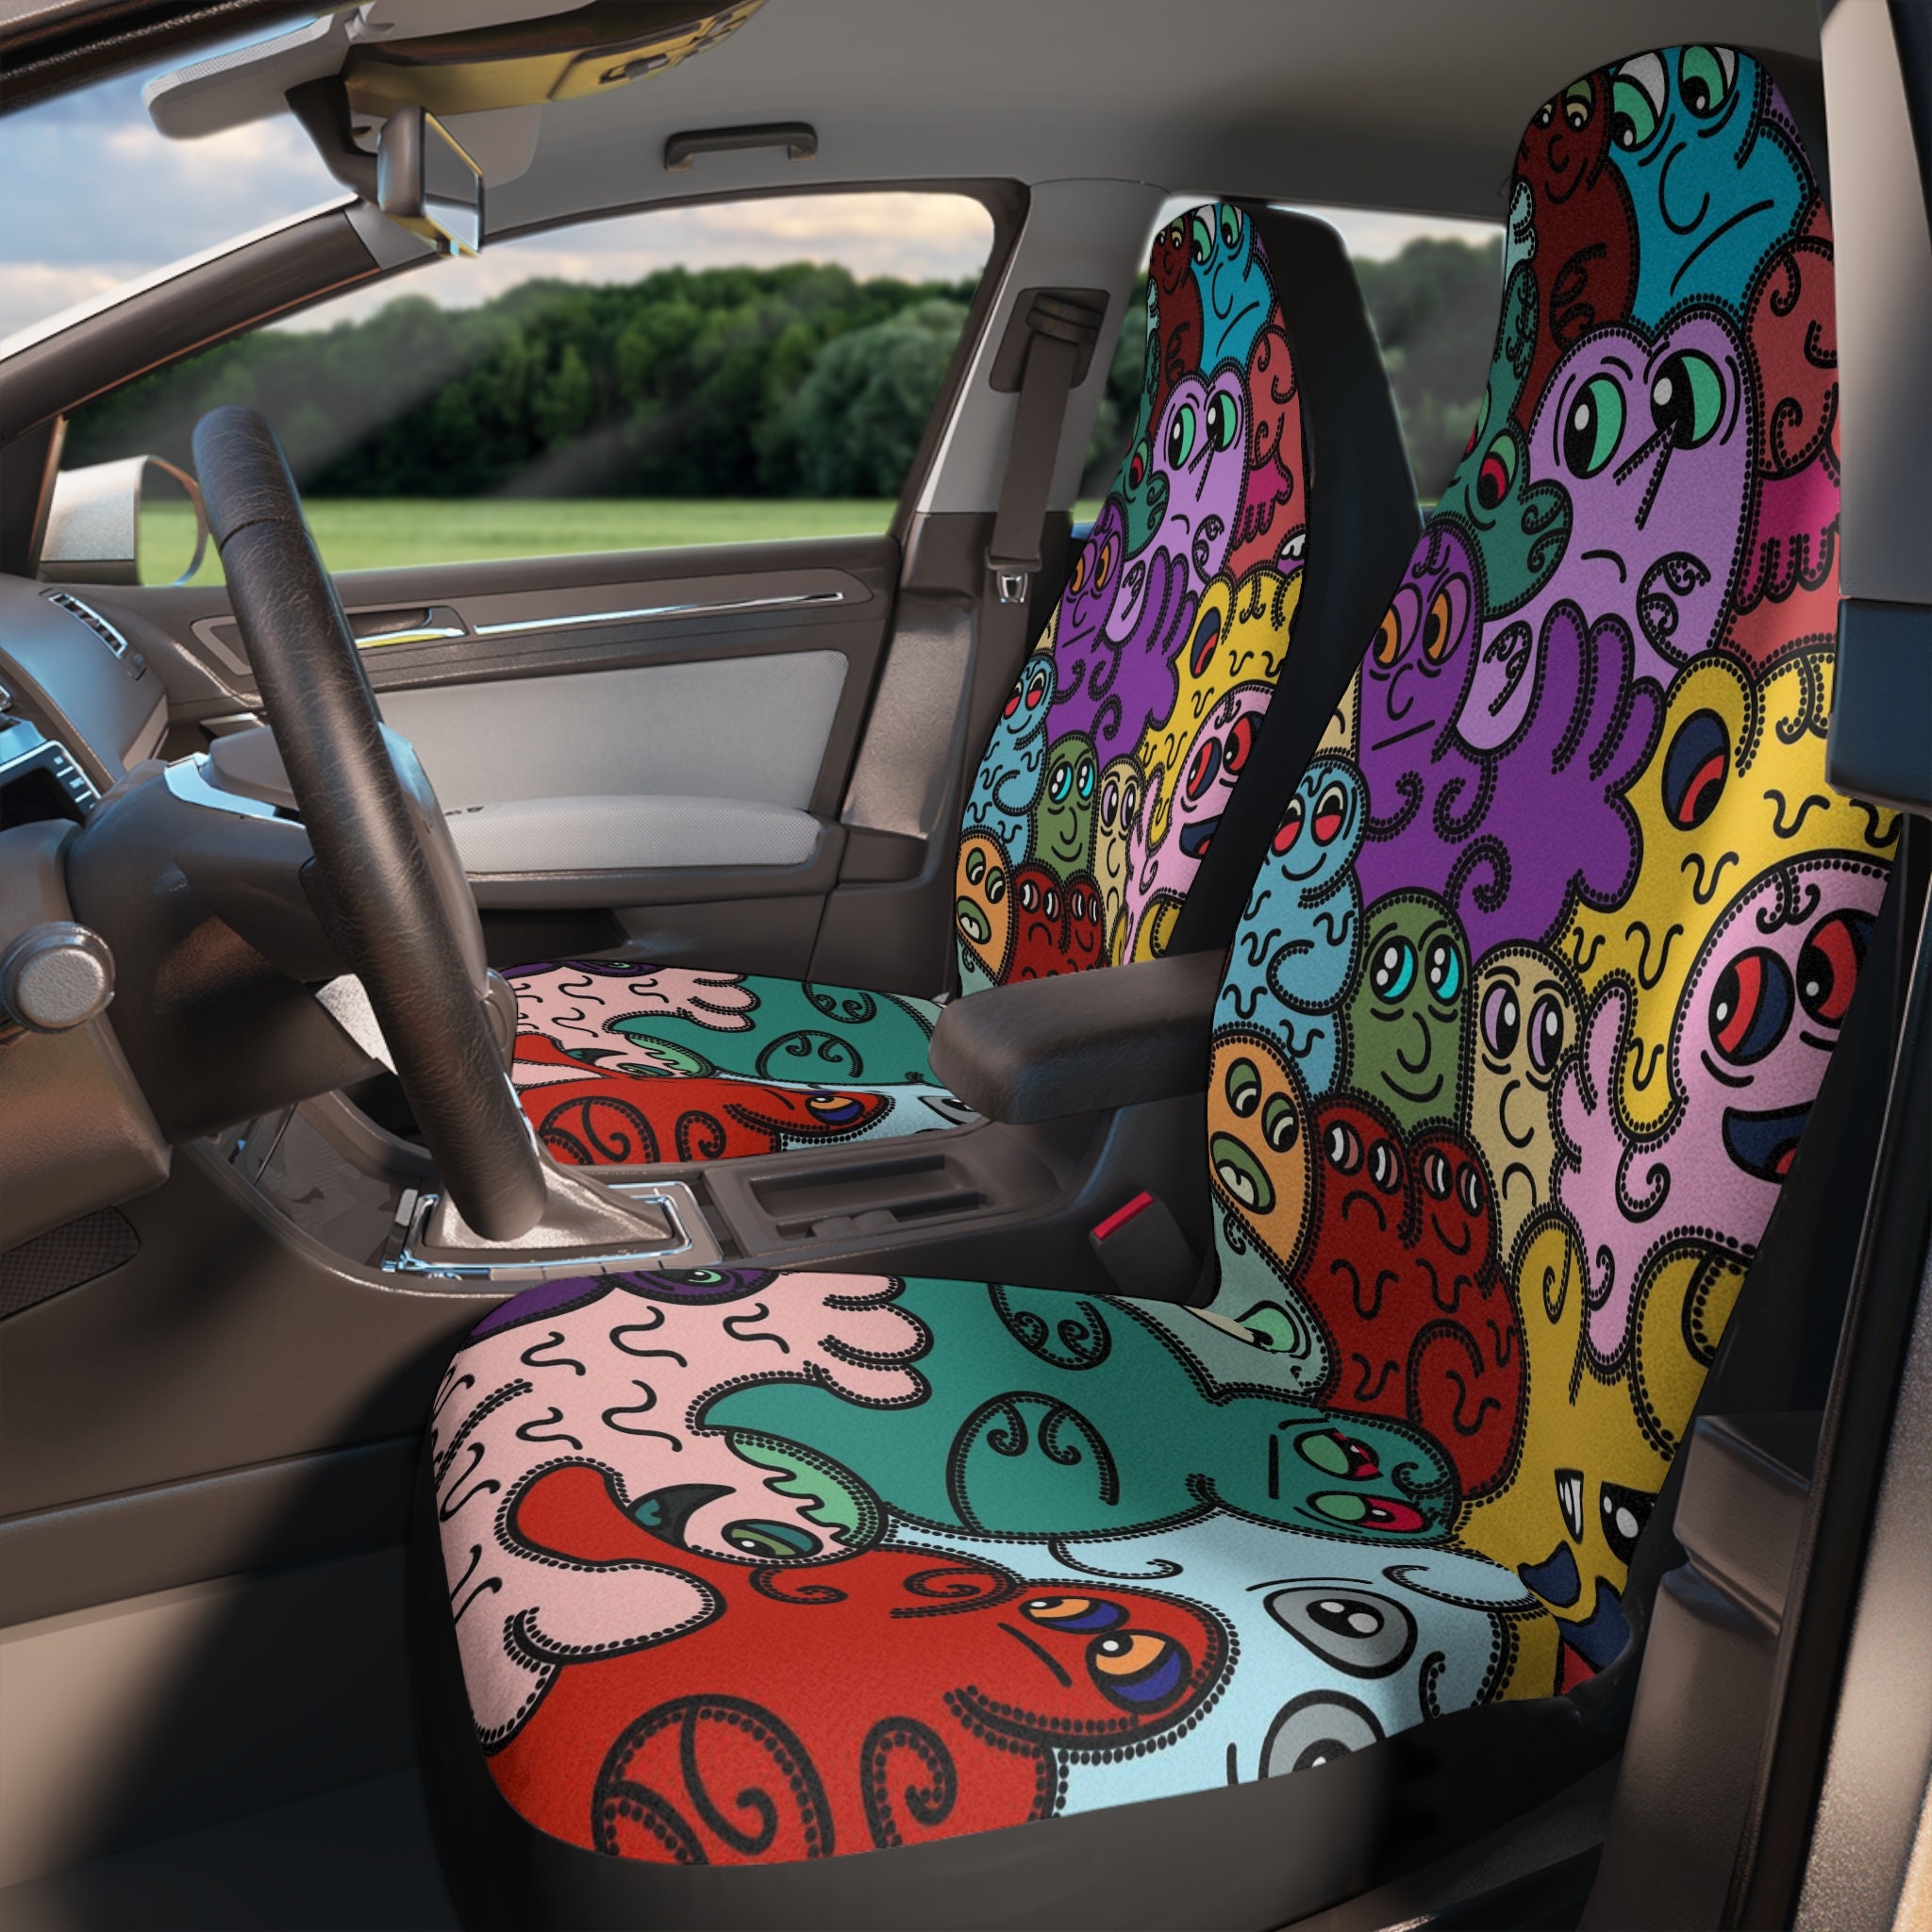 Discover Modern Art Seat Covers for Car, Pop Art Car Seat Covers, Contemporary Art Car Seat Cover, Cute Car Accessories, Gift for Women, Gift for Men